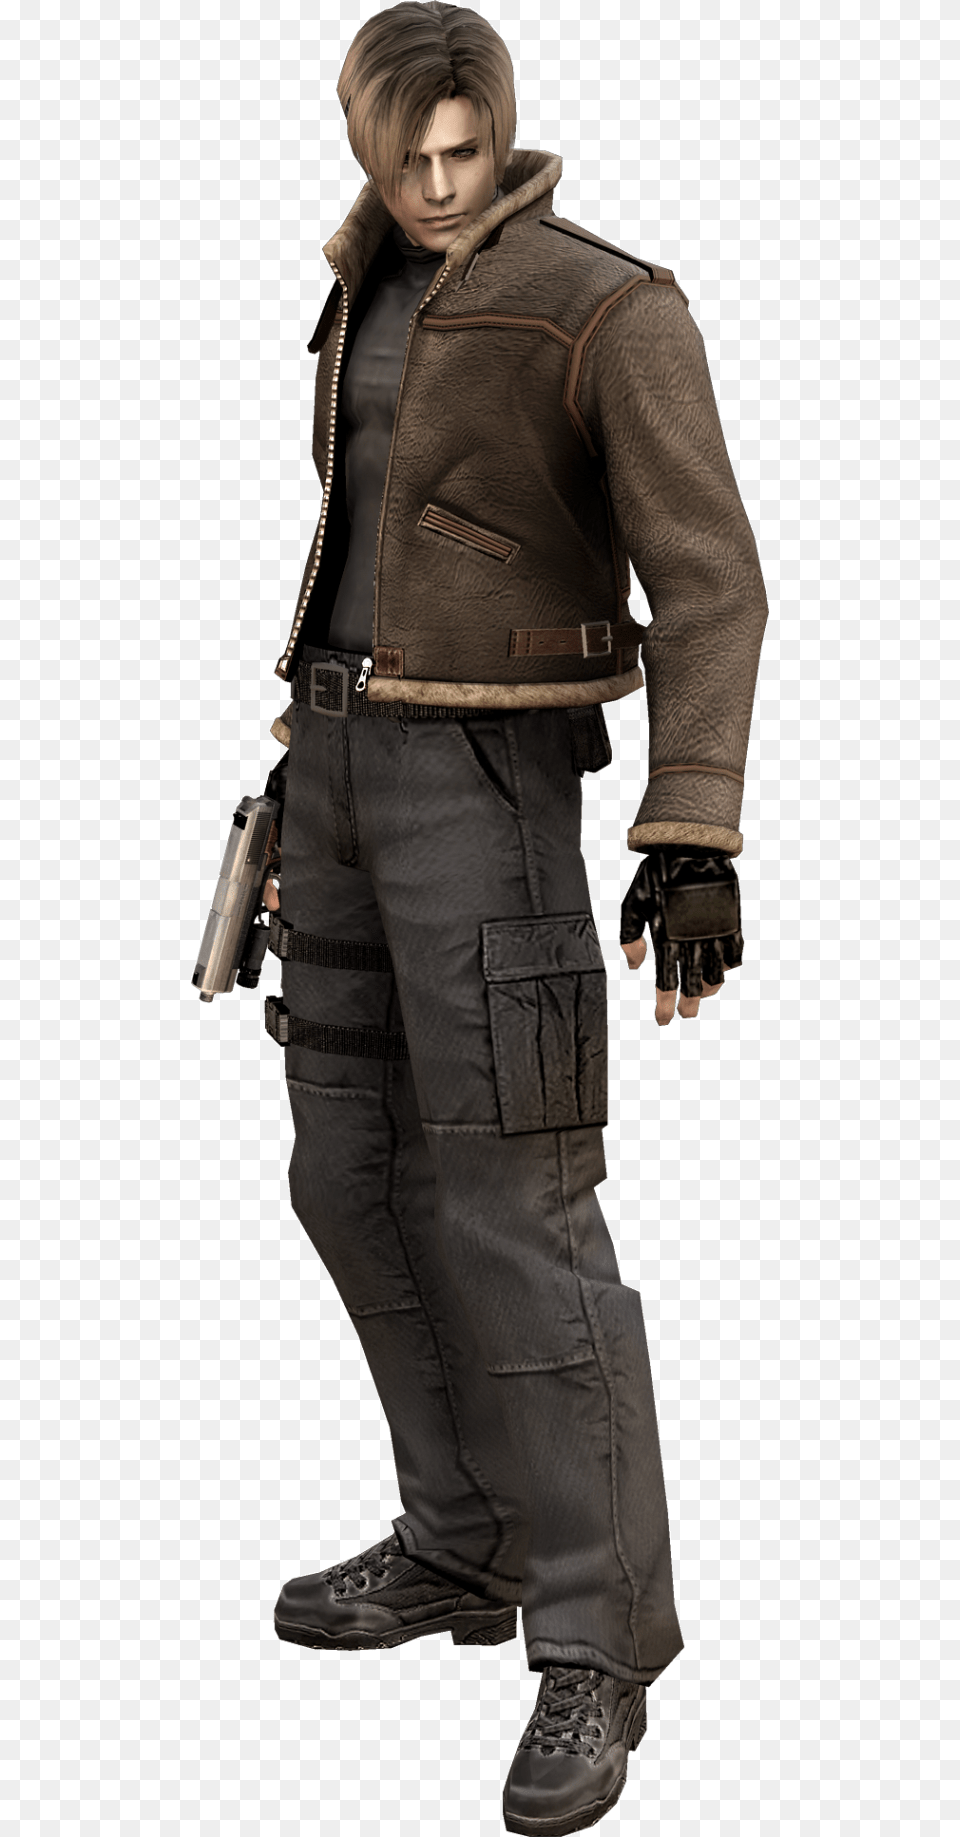 Leon Scott Kennedy Makes His First Appearance As One, Weapon, Pants, Jacket, Handgun Free Transparent Png